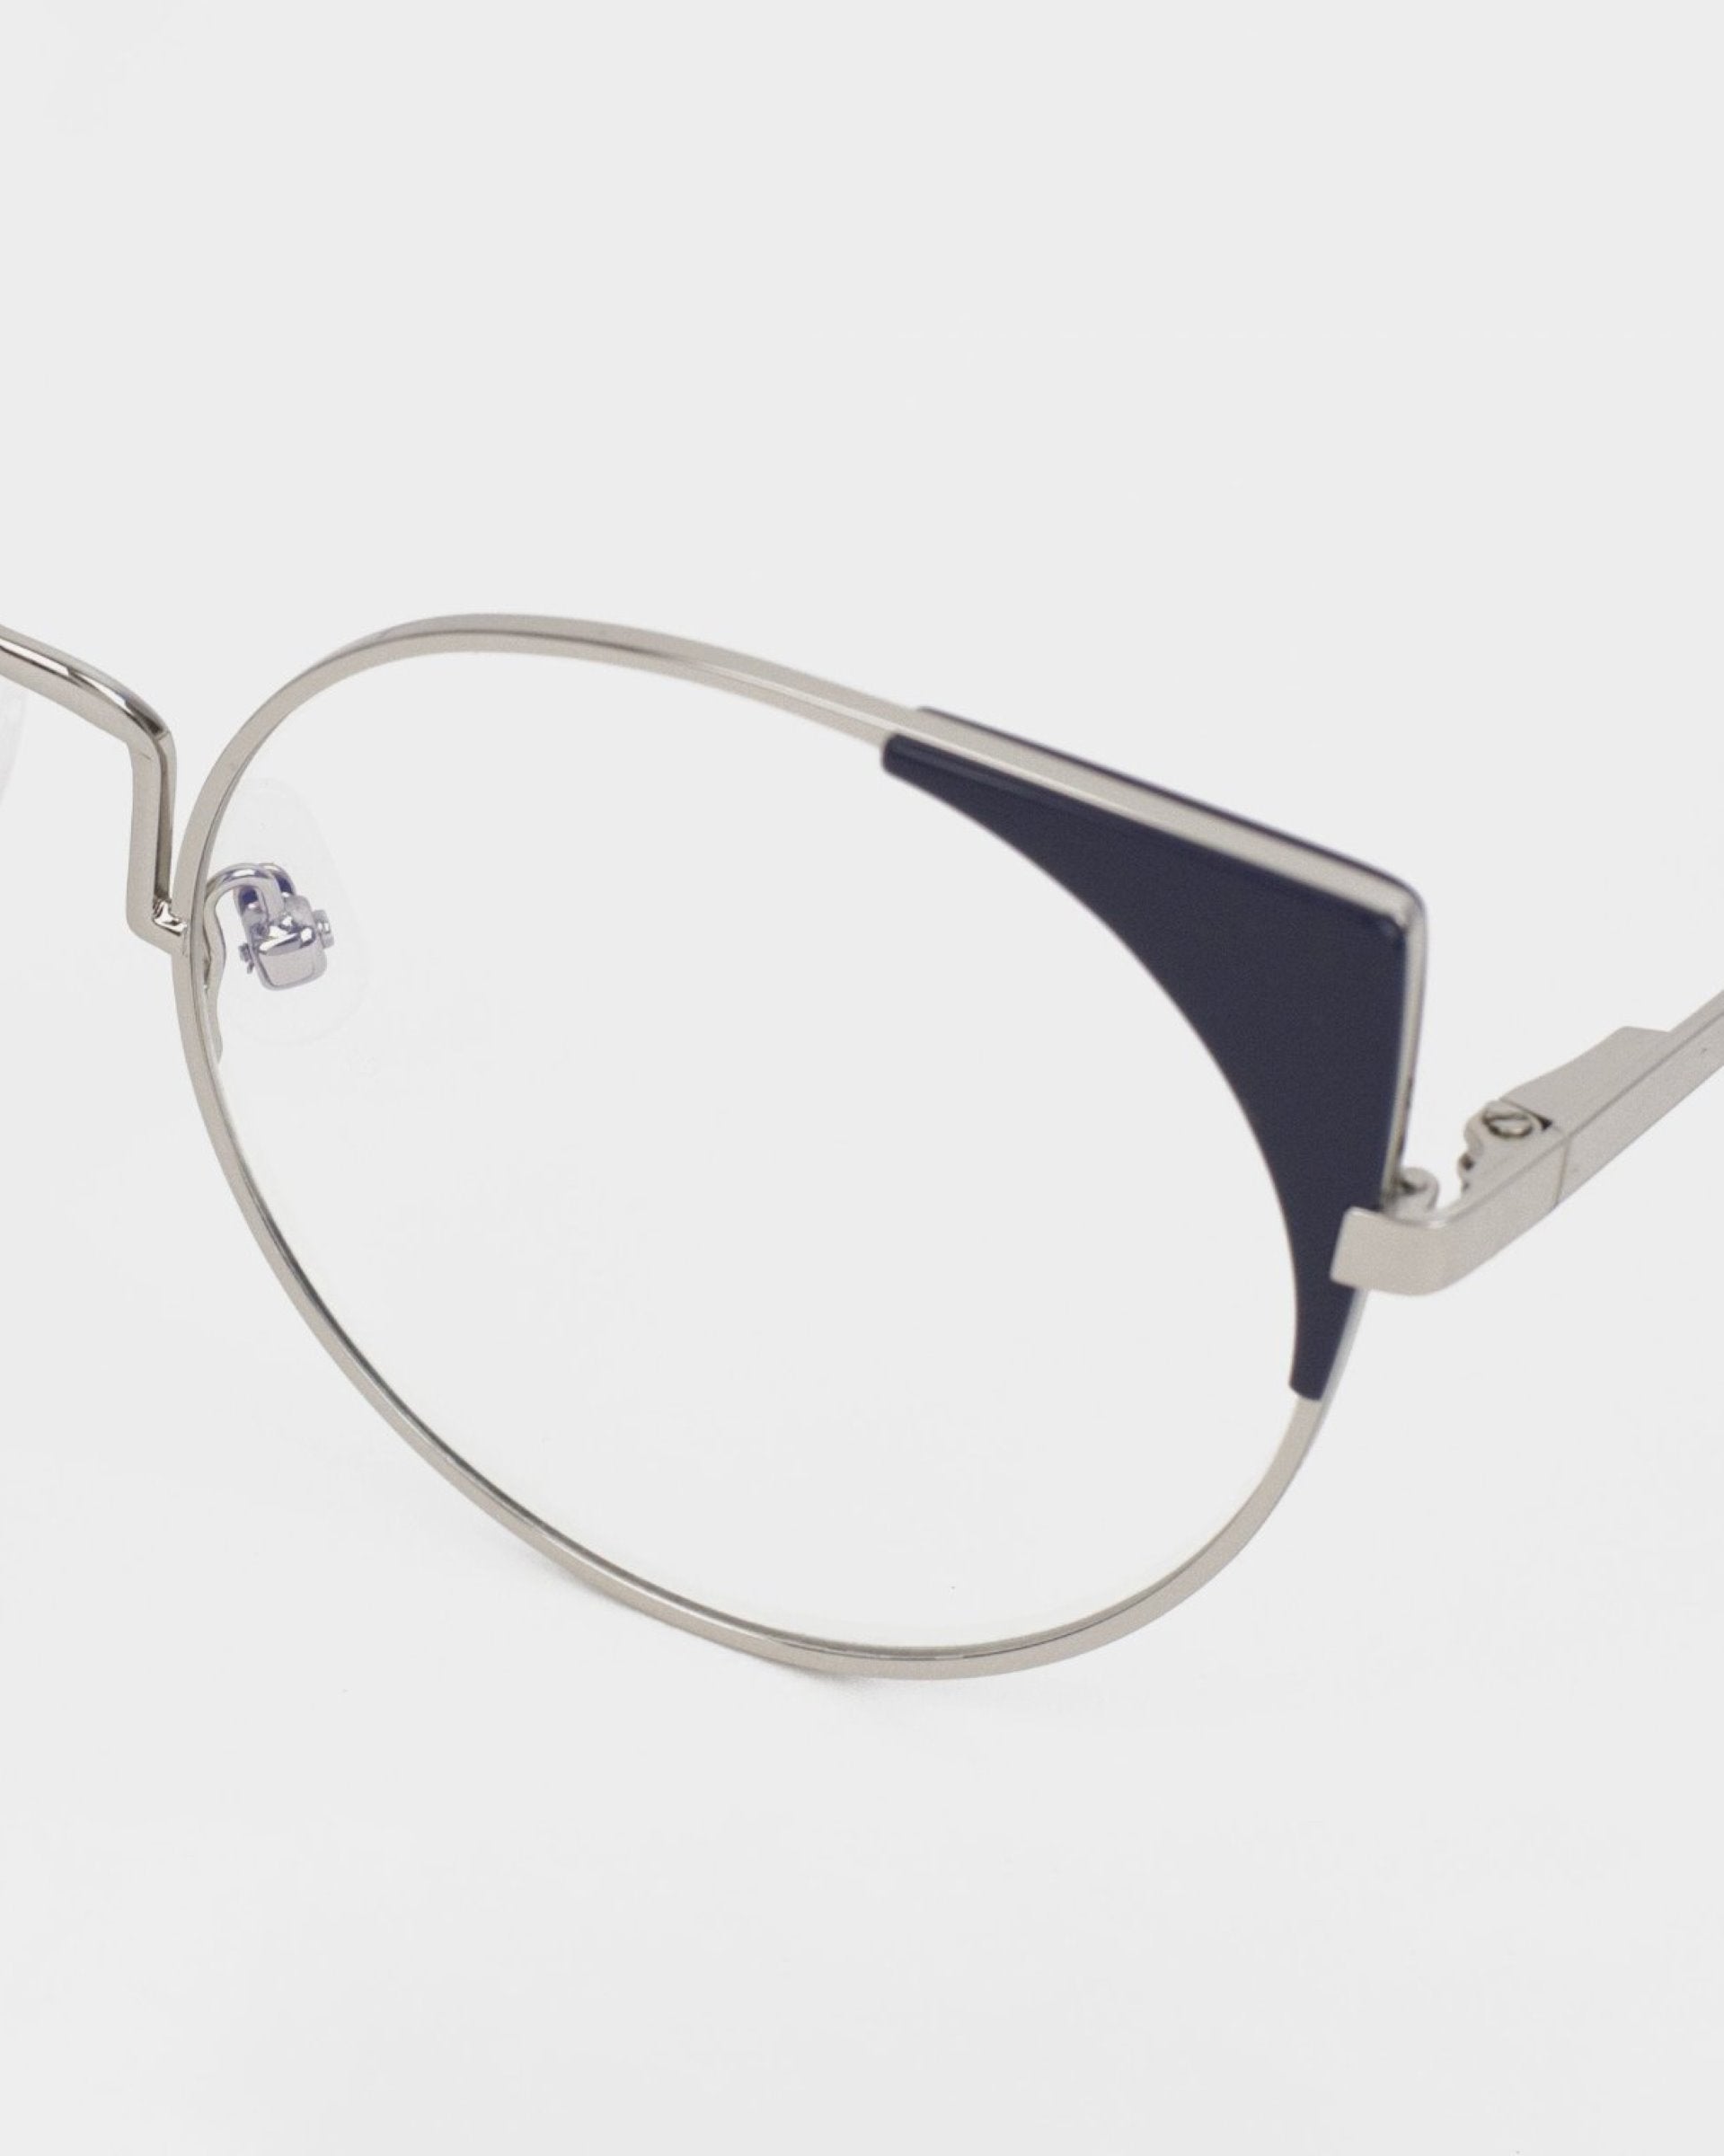 A close-up of Brisky metal-framed glasses with a cat-eye design by For Art's Sake®. The frame is silver with black accents on the upper outer corners of the lenses, featuring a blue light filter. The background is plain white, highlighting the sleek and modern design of these glasses.